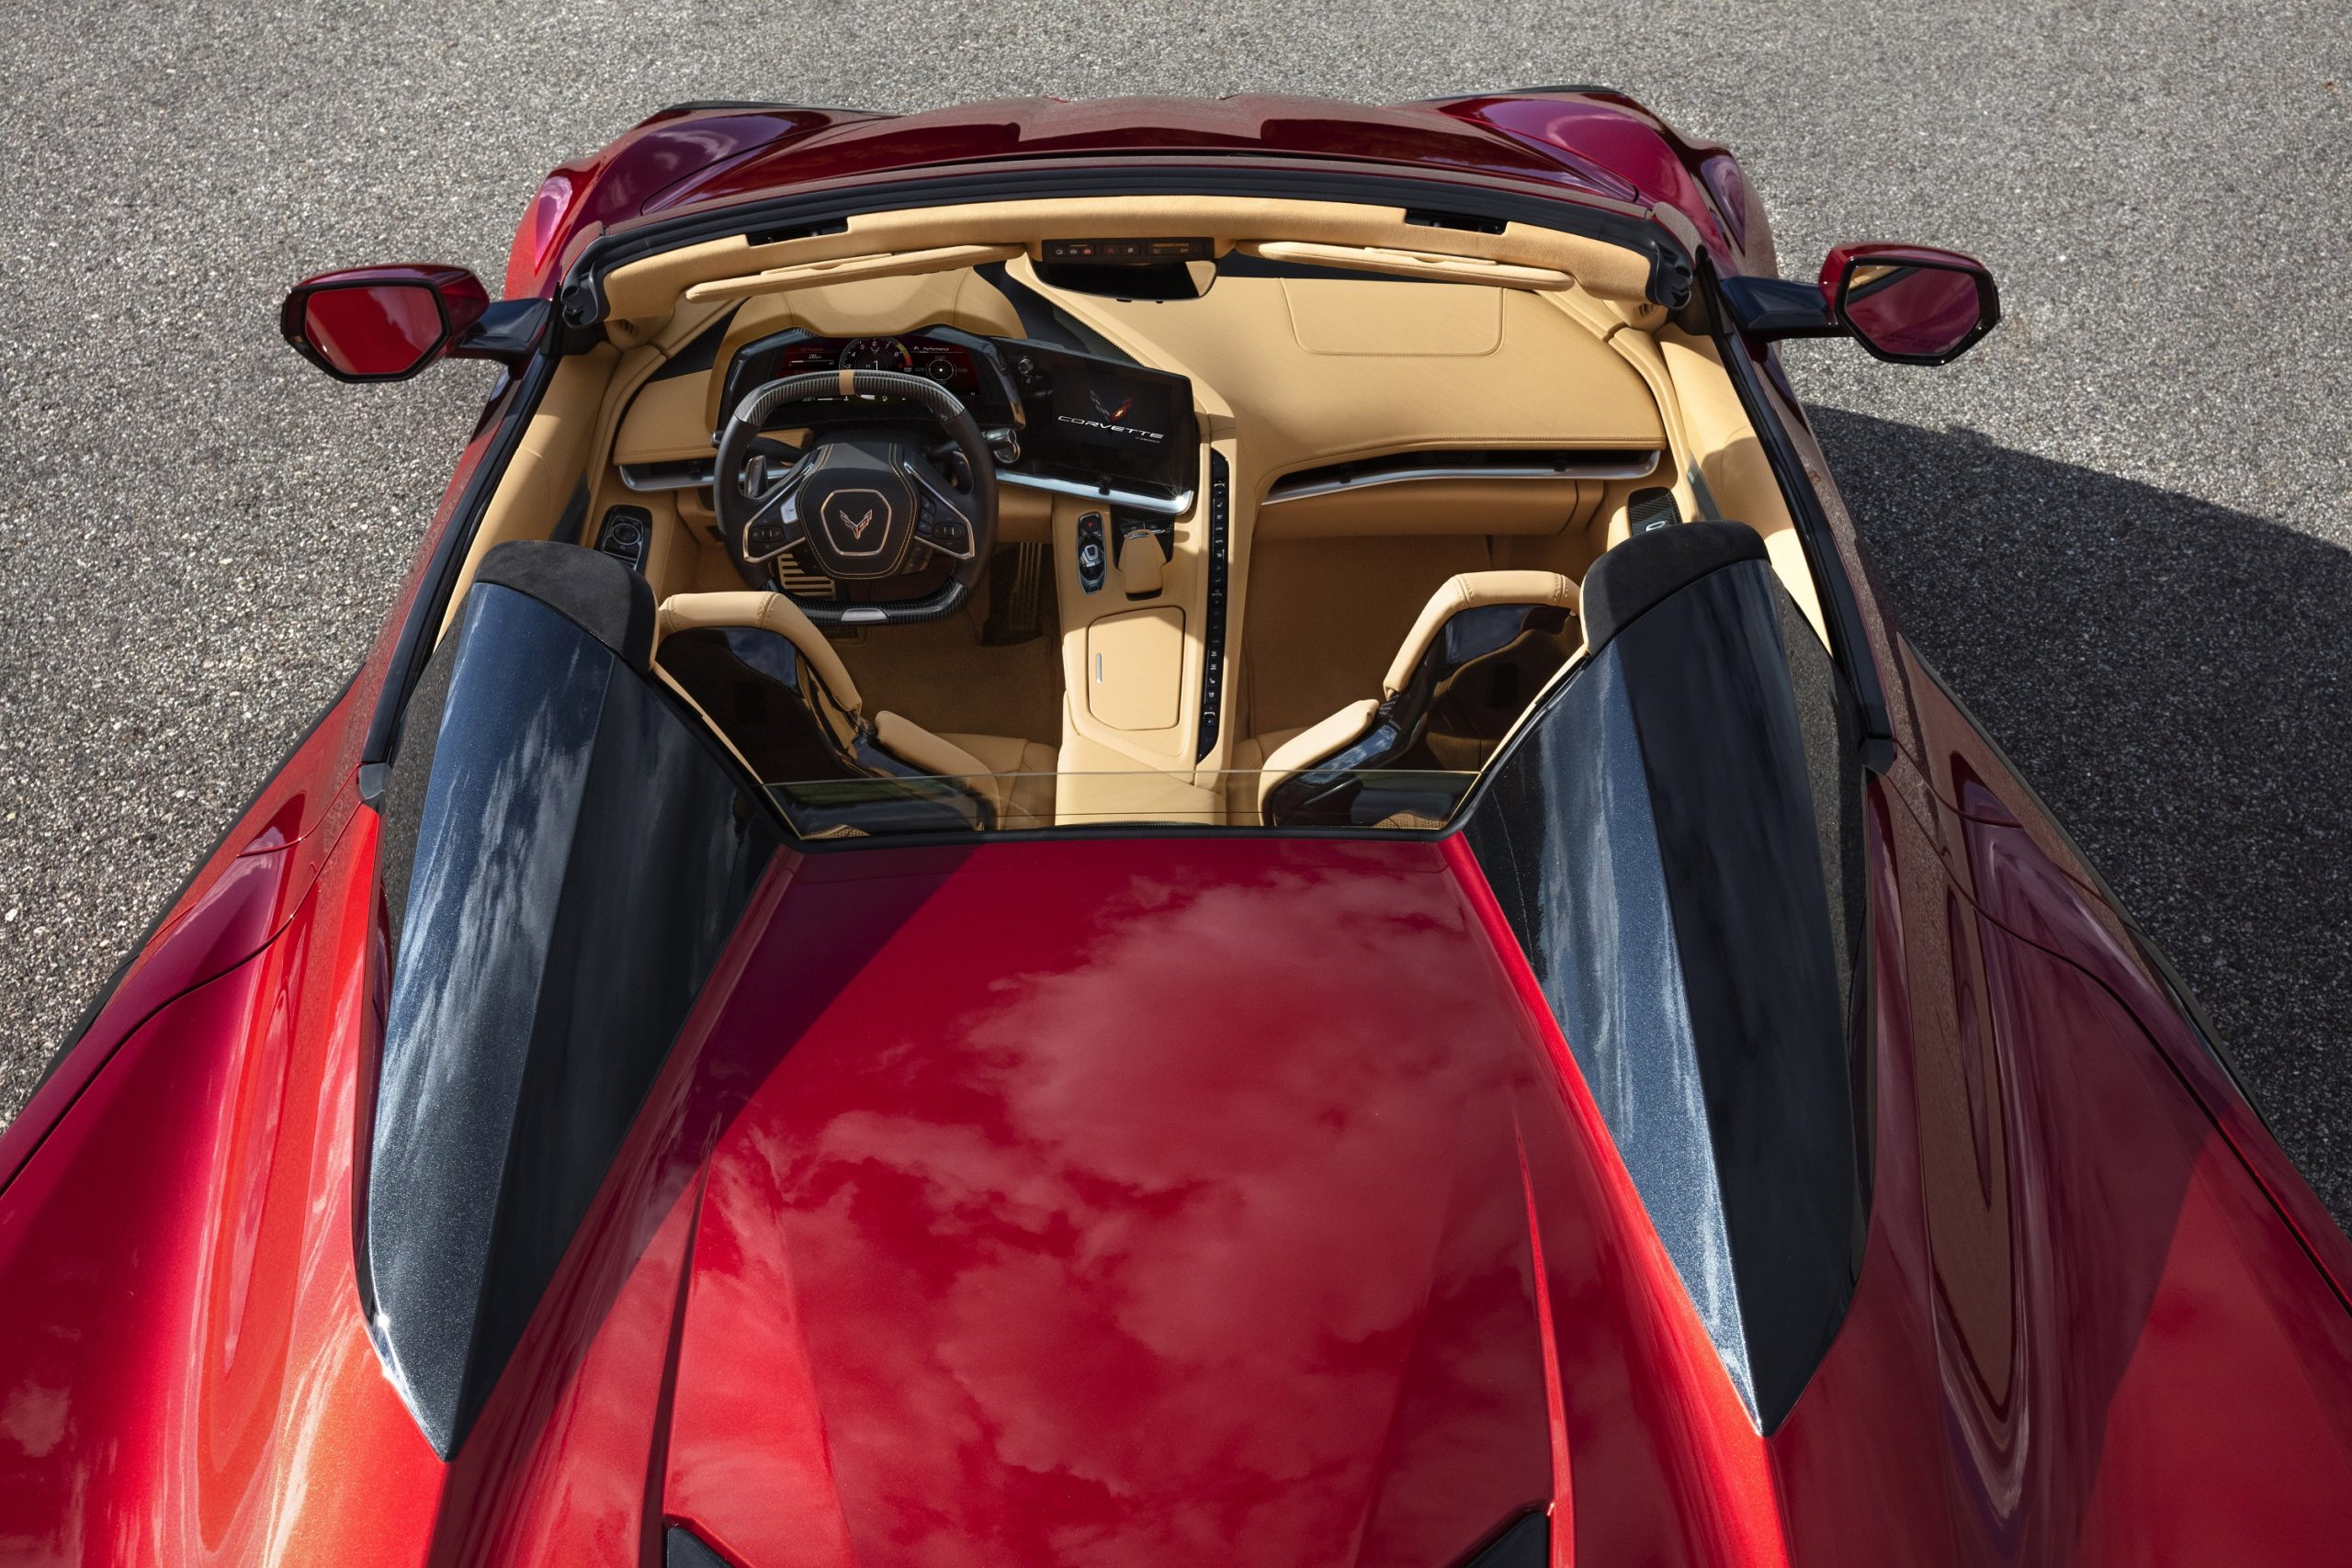 A top down view of the Z06 convertible's interior